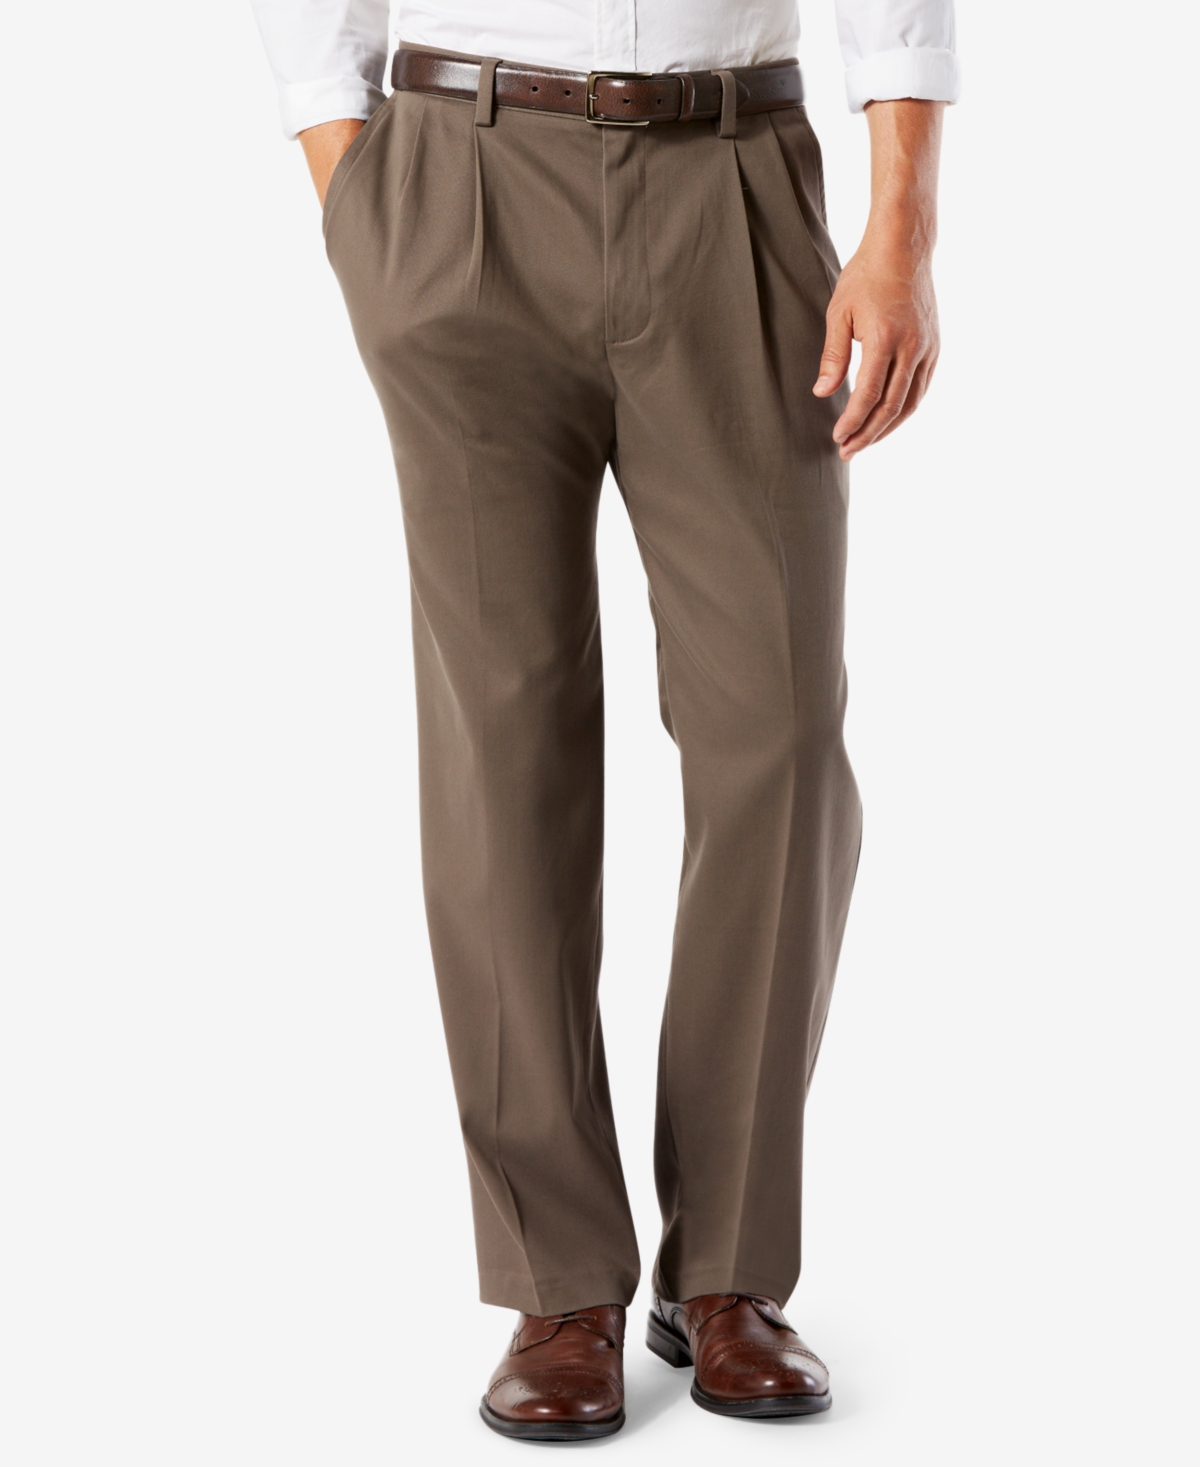 Men's Easy Classic Pleated Fit Khaki Stretch Pants - Coffee Bean